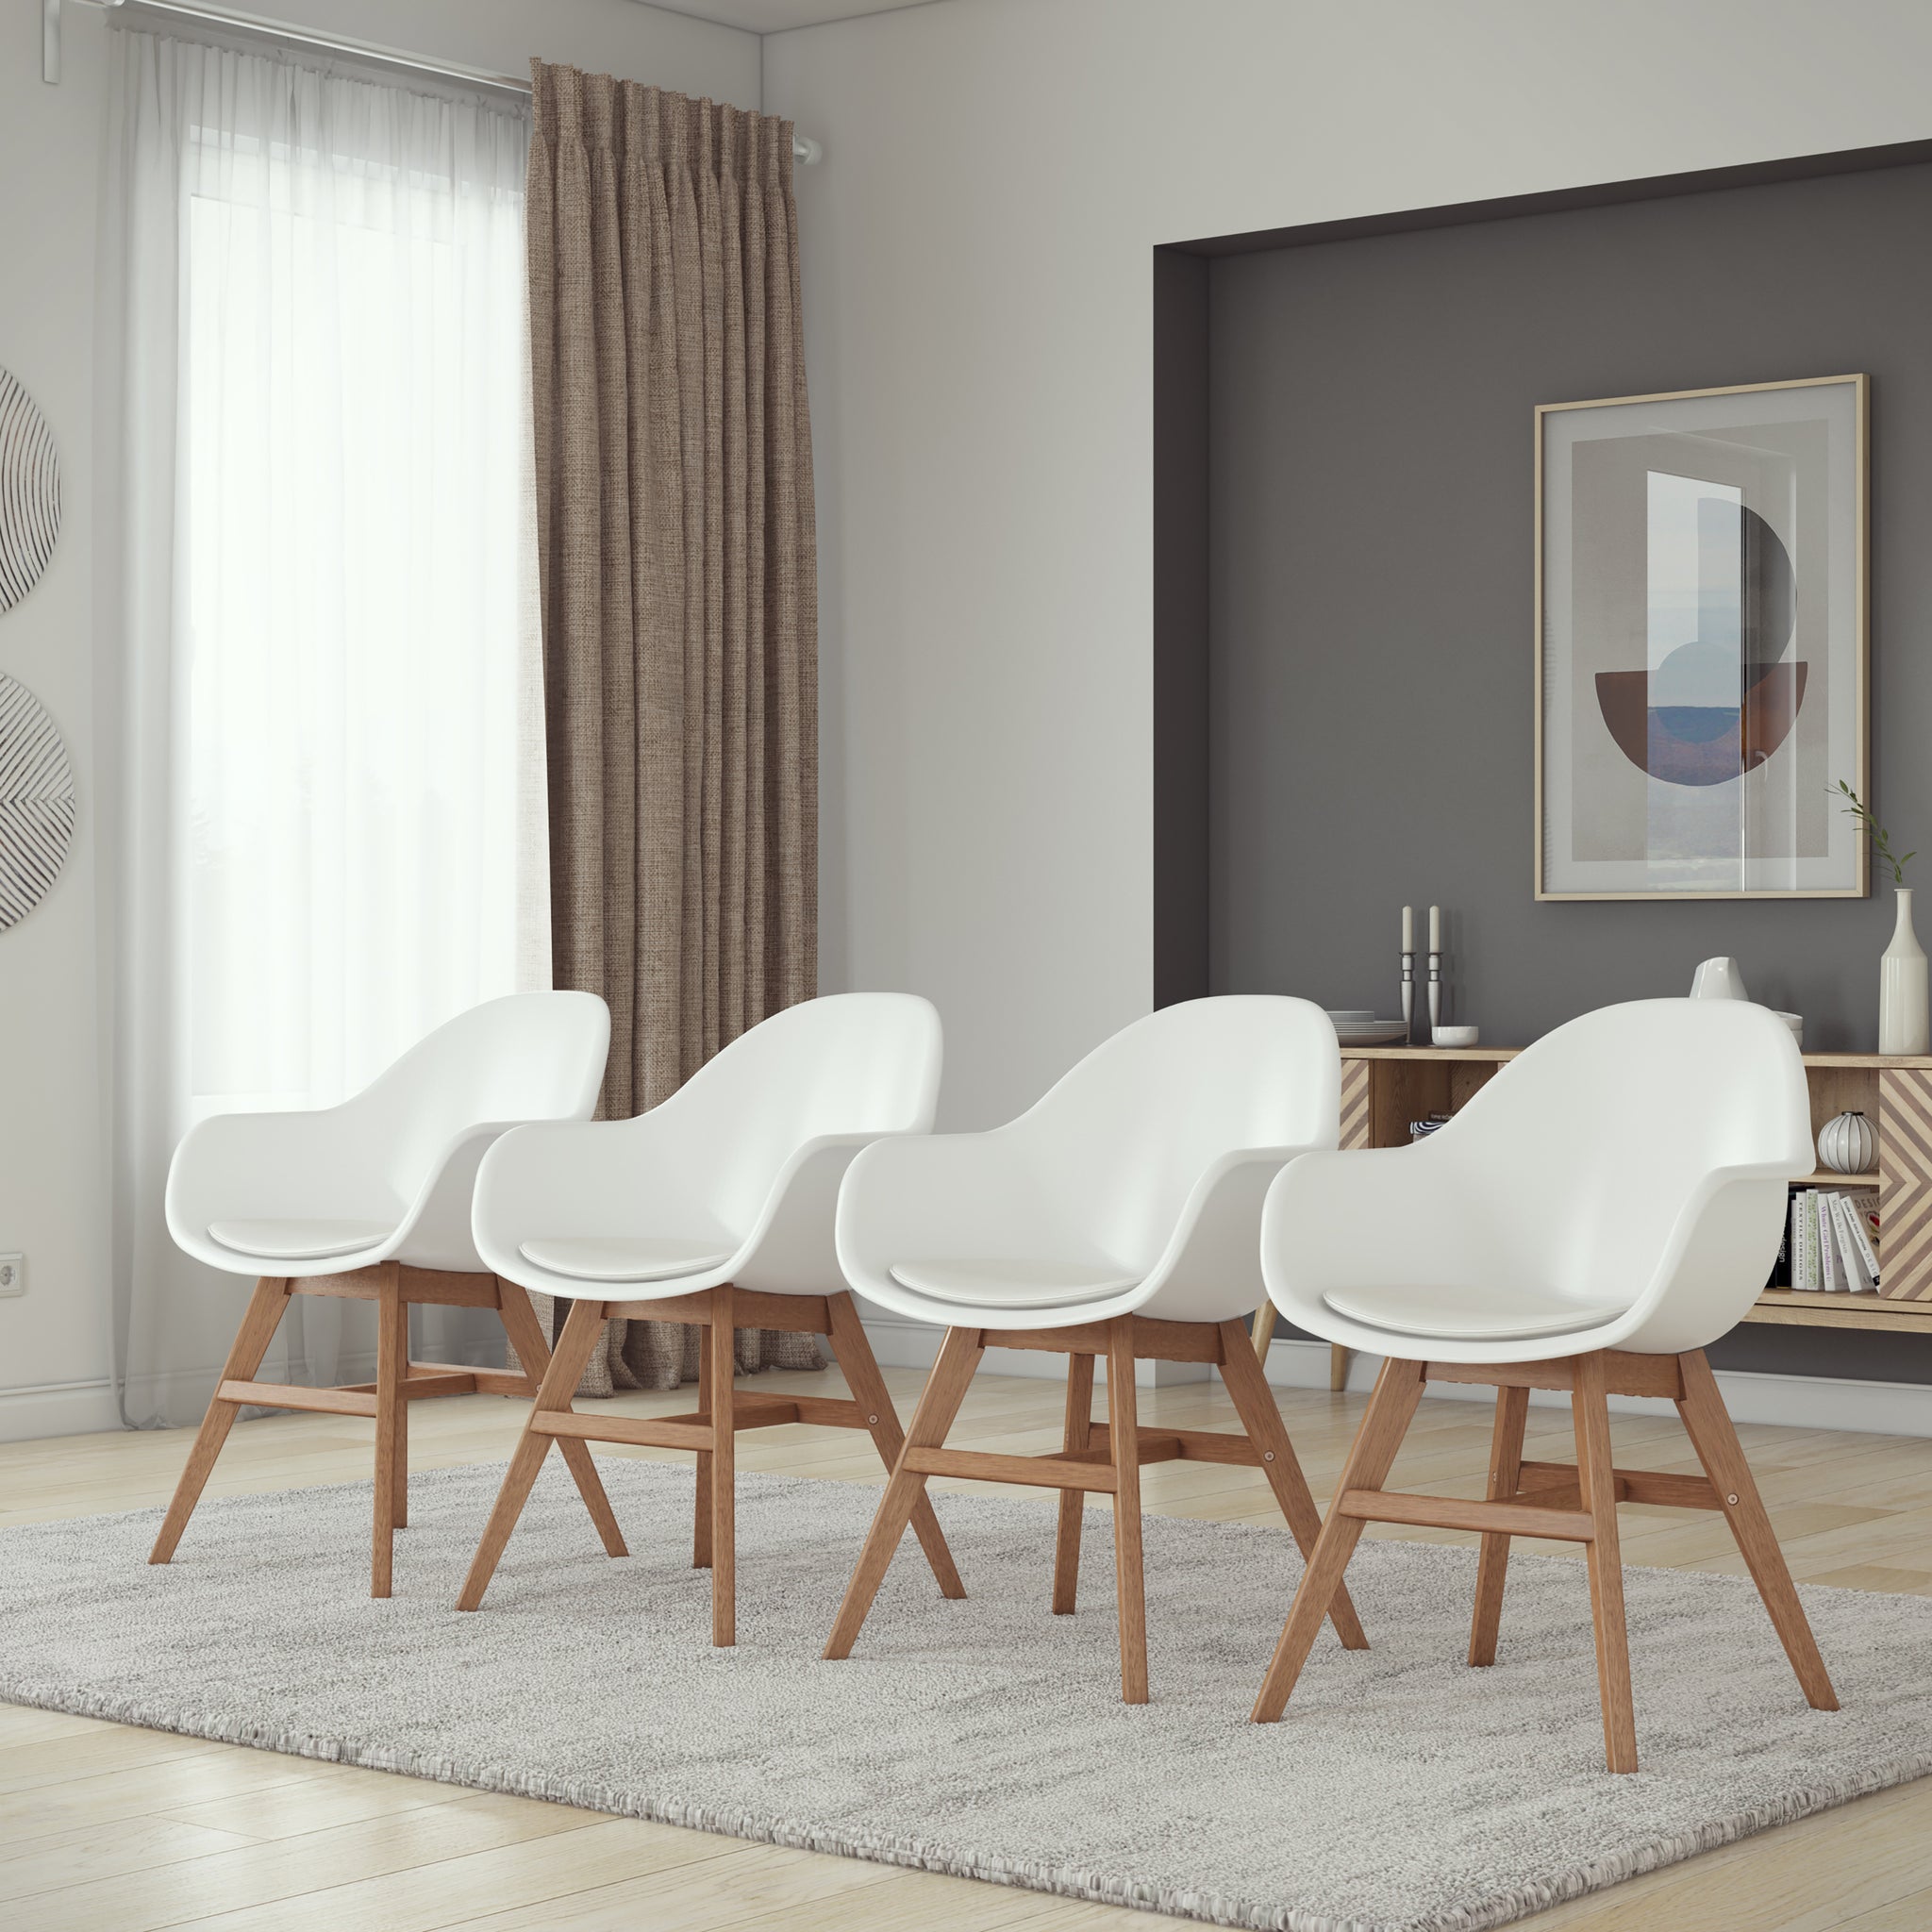 Concarneu Arm Indoor Dining Chair - 4PC